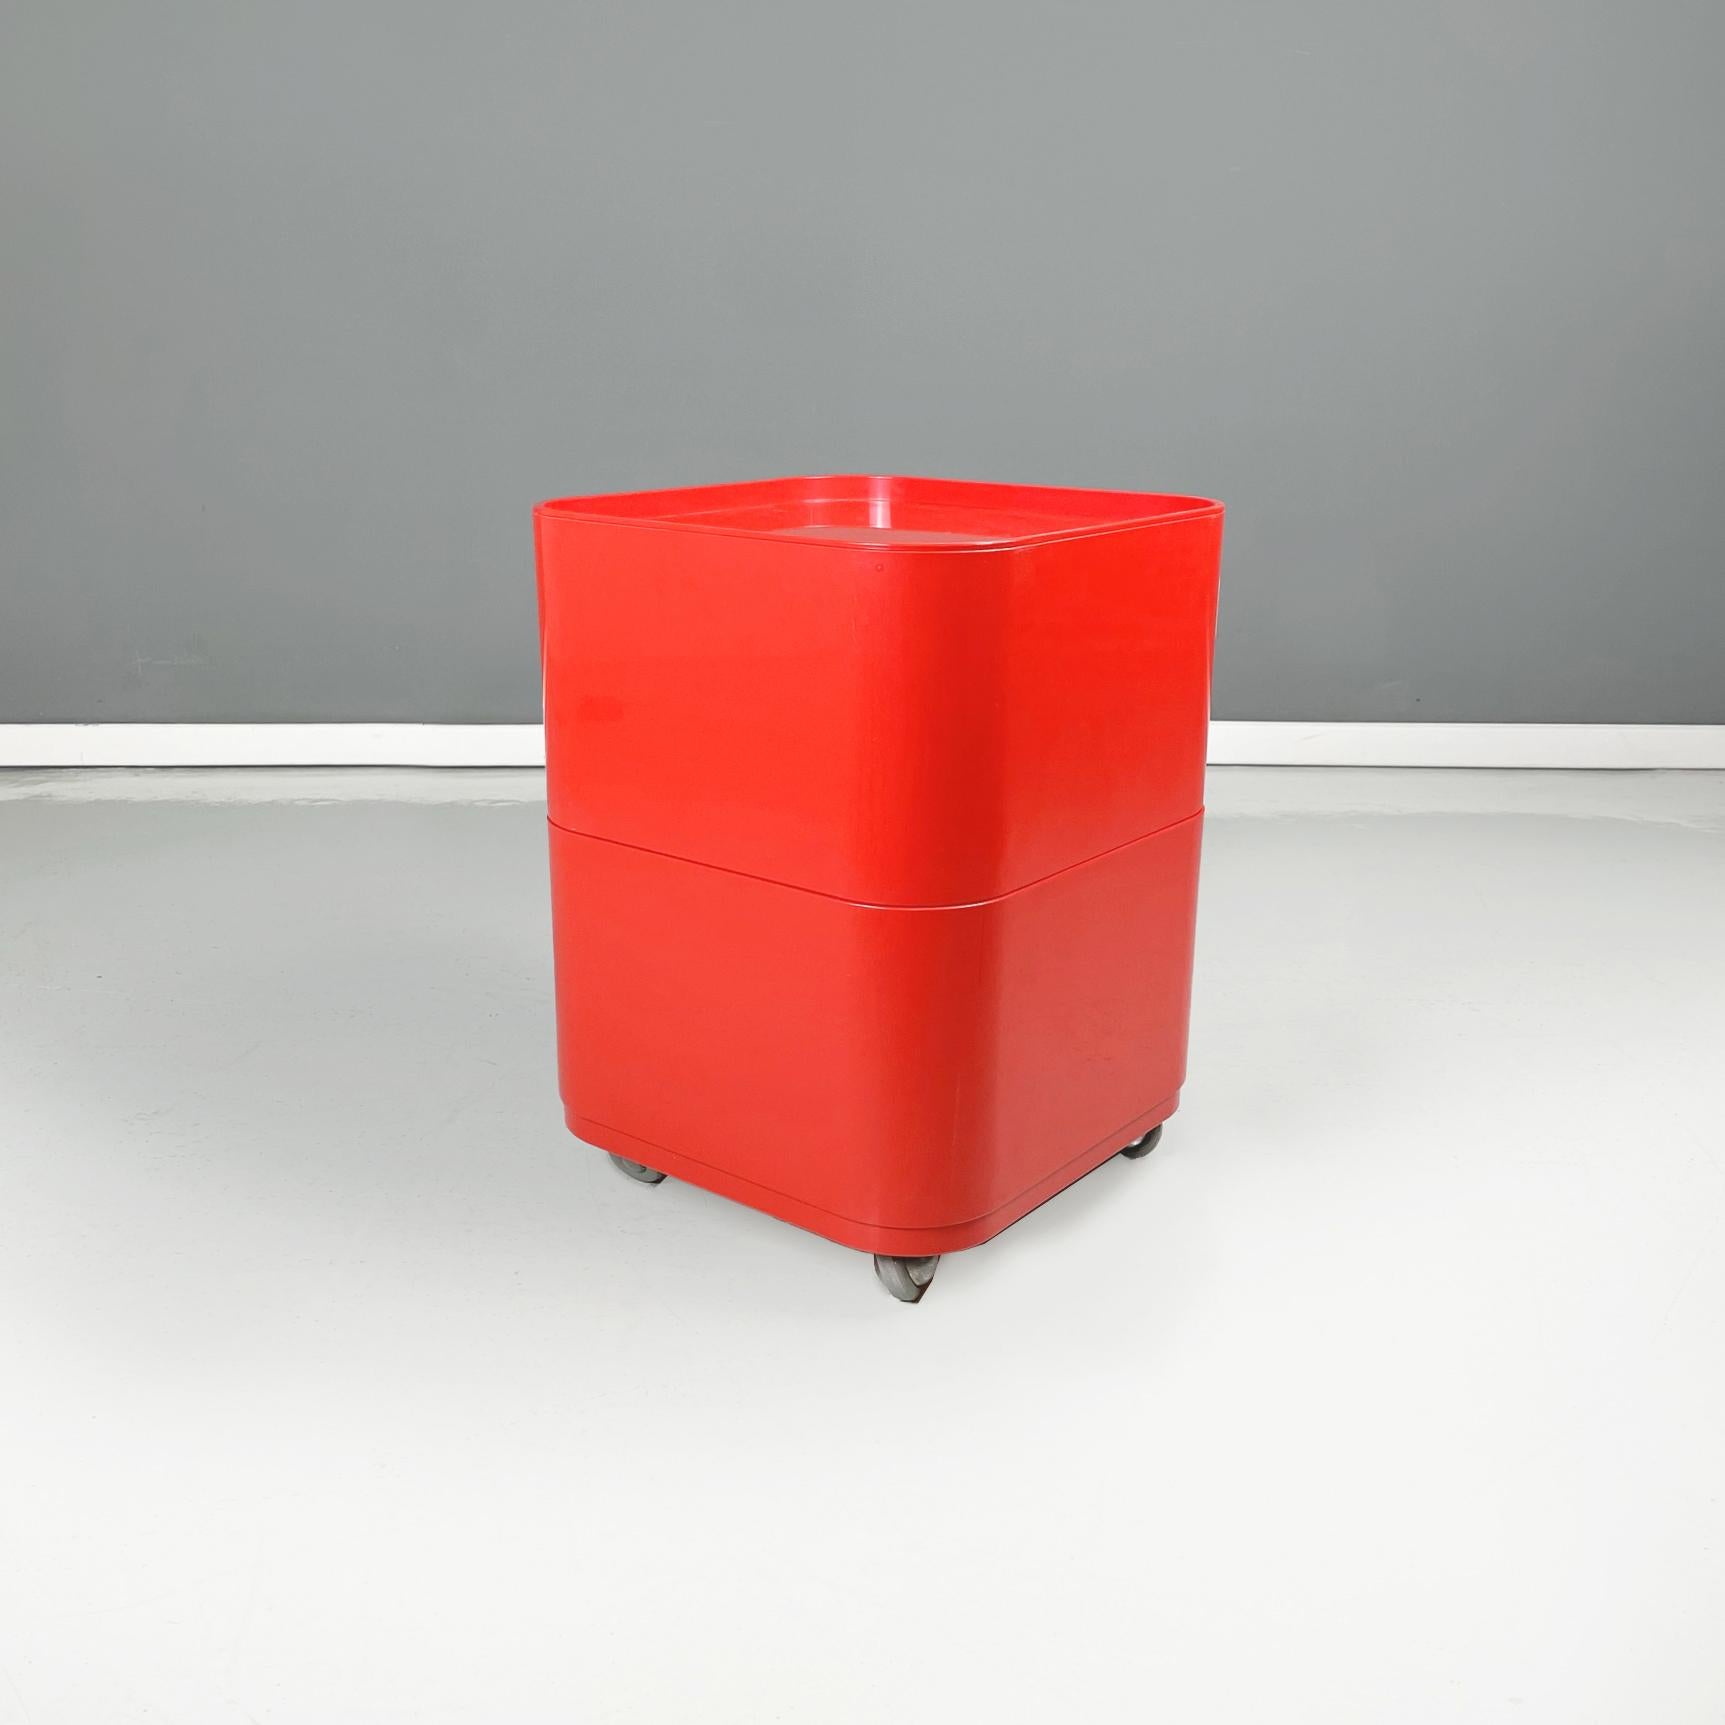 Late 20th Century Italian Space Age Red Modular Chest of Drawers by Castelli for Kartell, 1970s For Sale